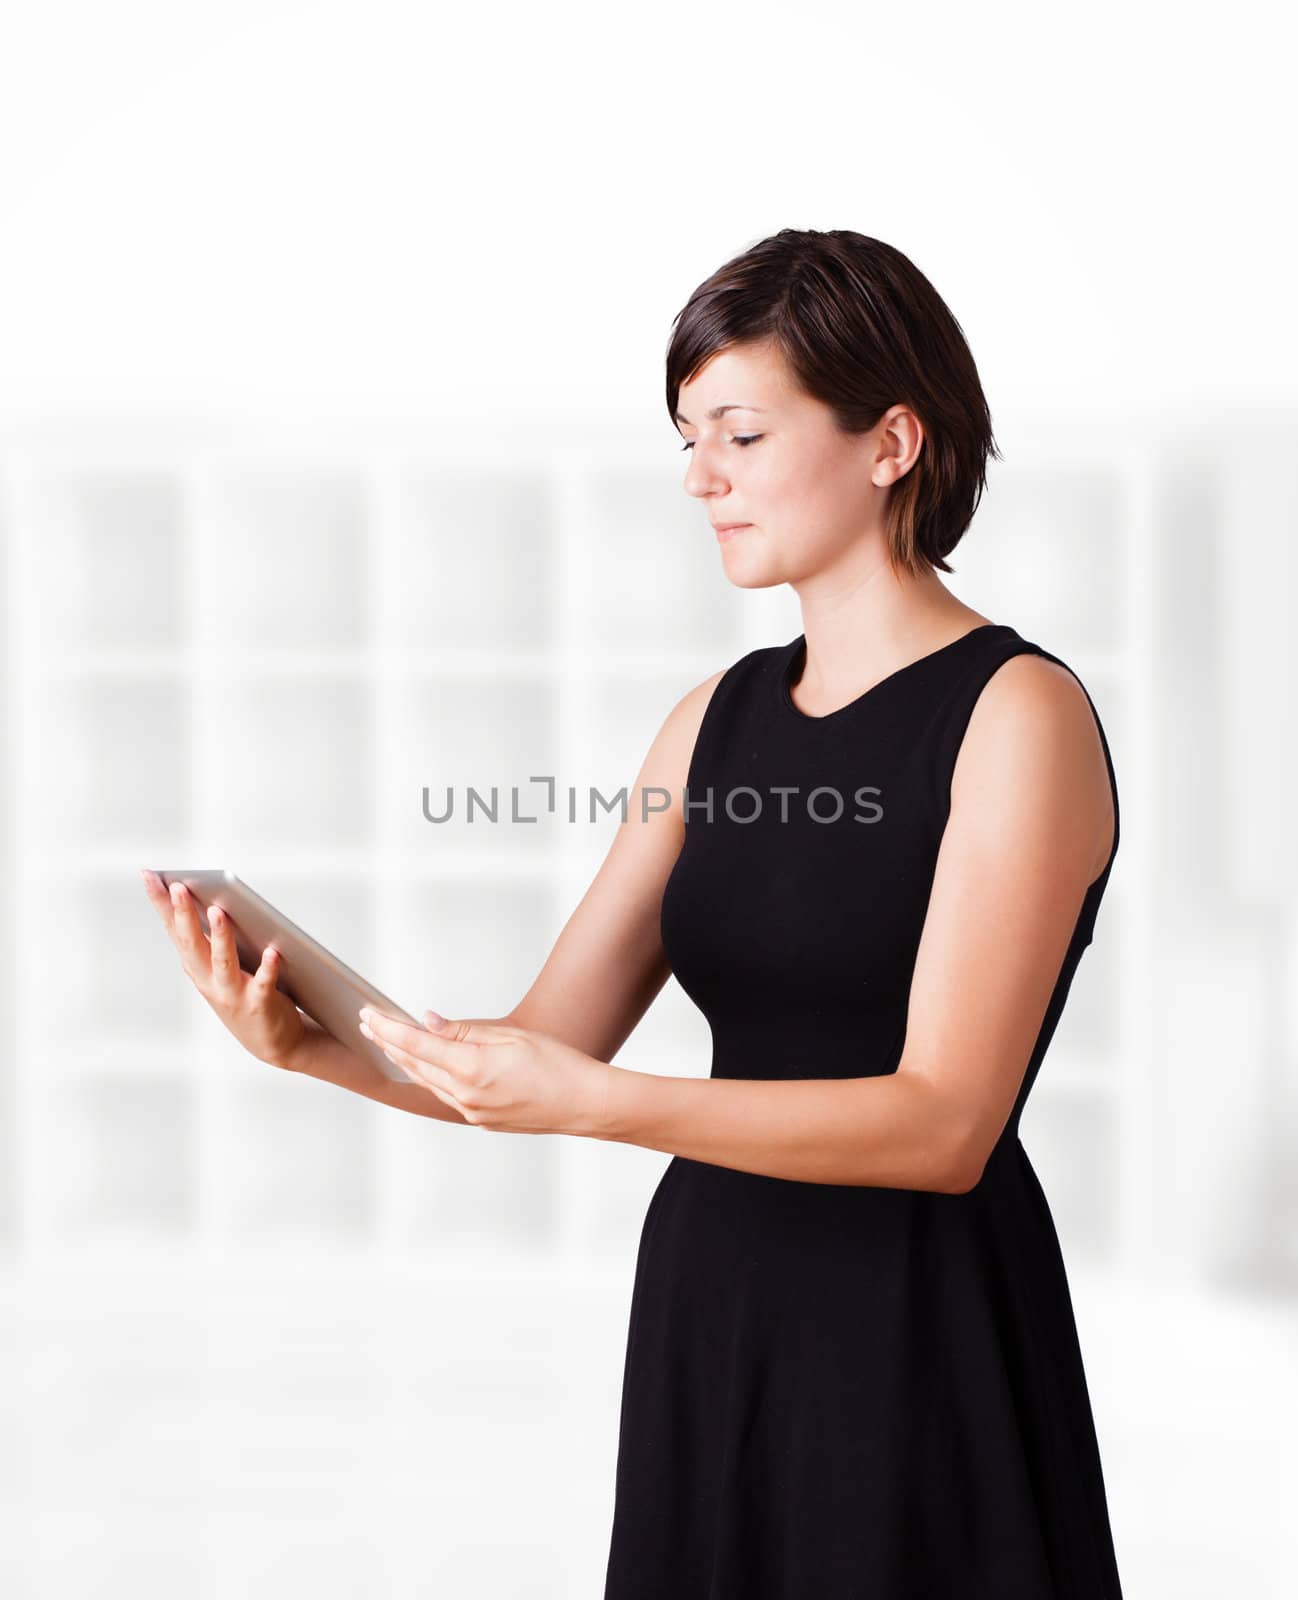 Young woman looking at modern tablet by ra2studio